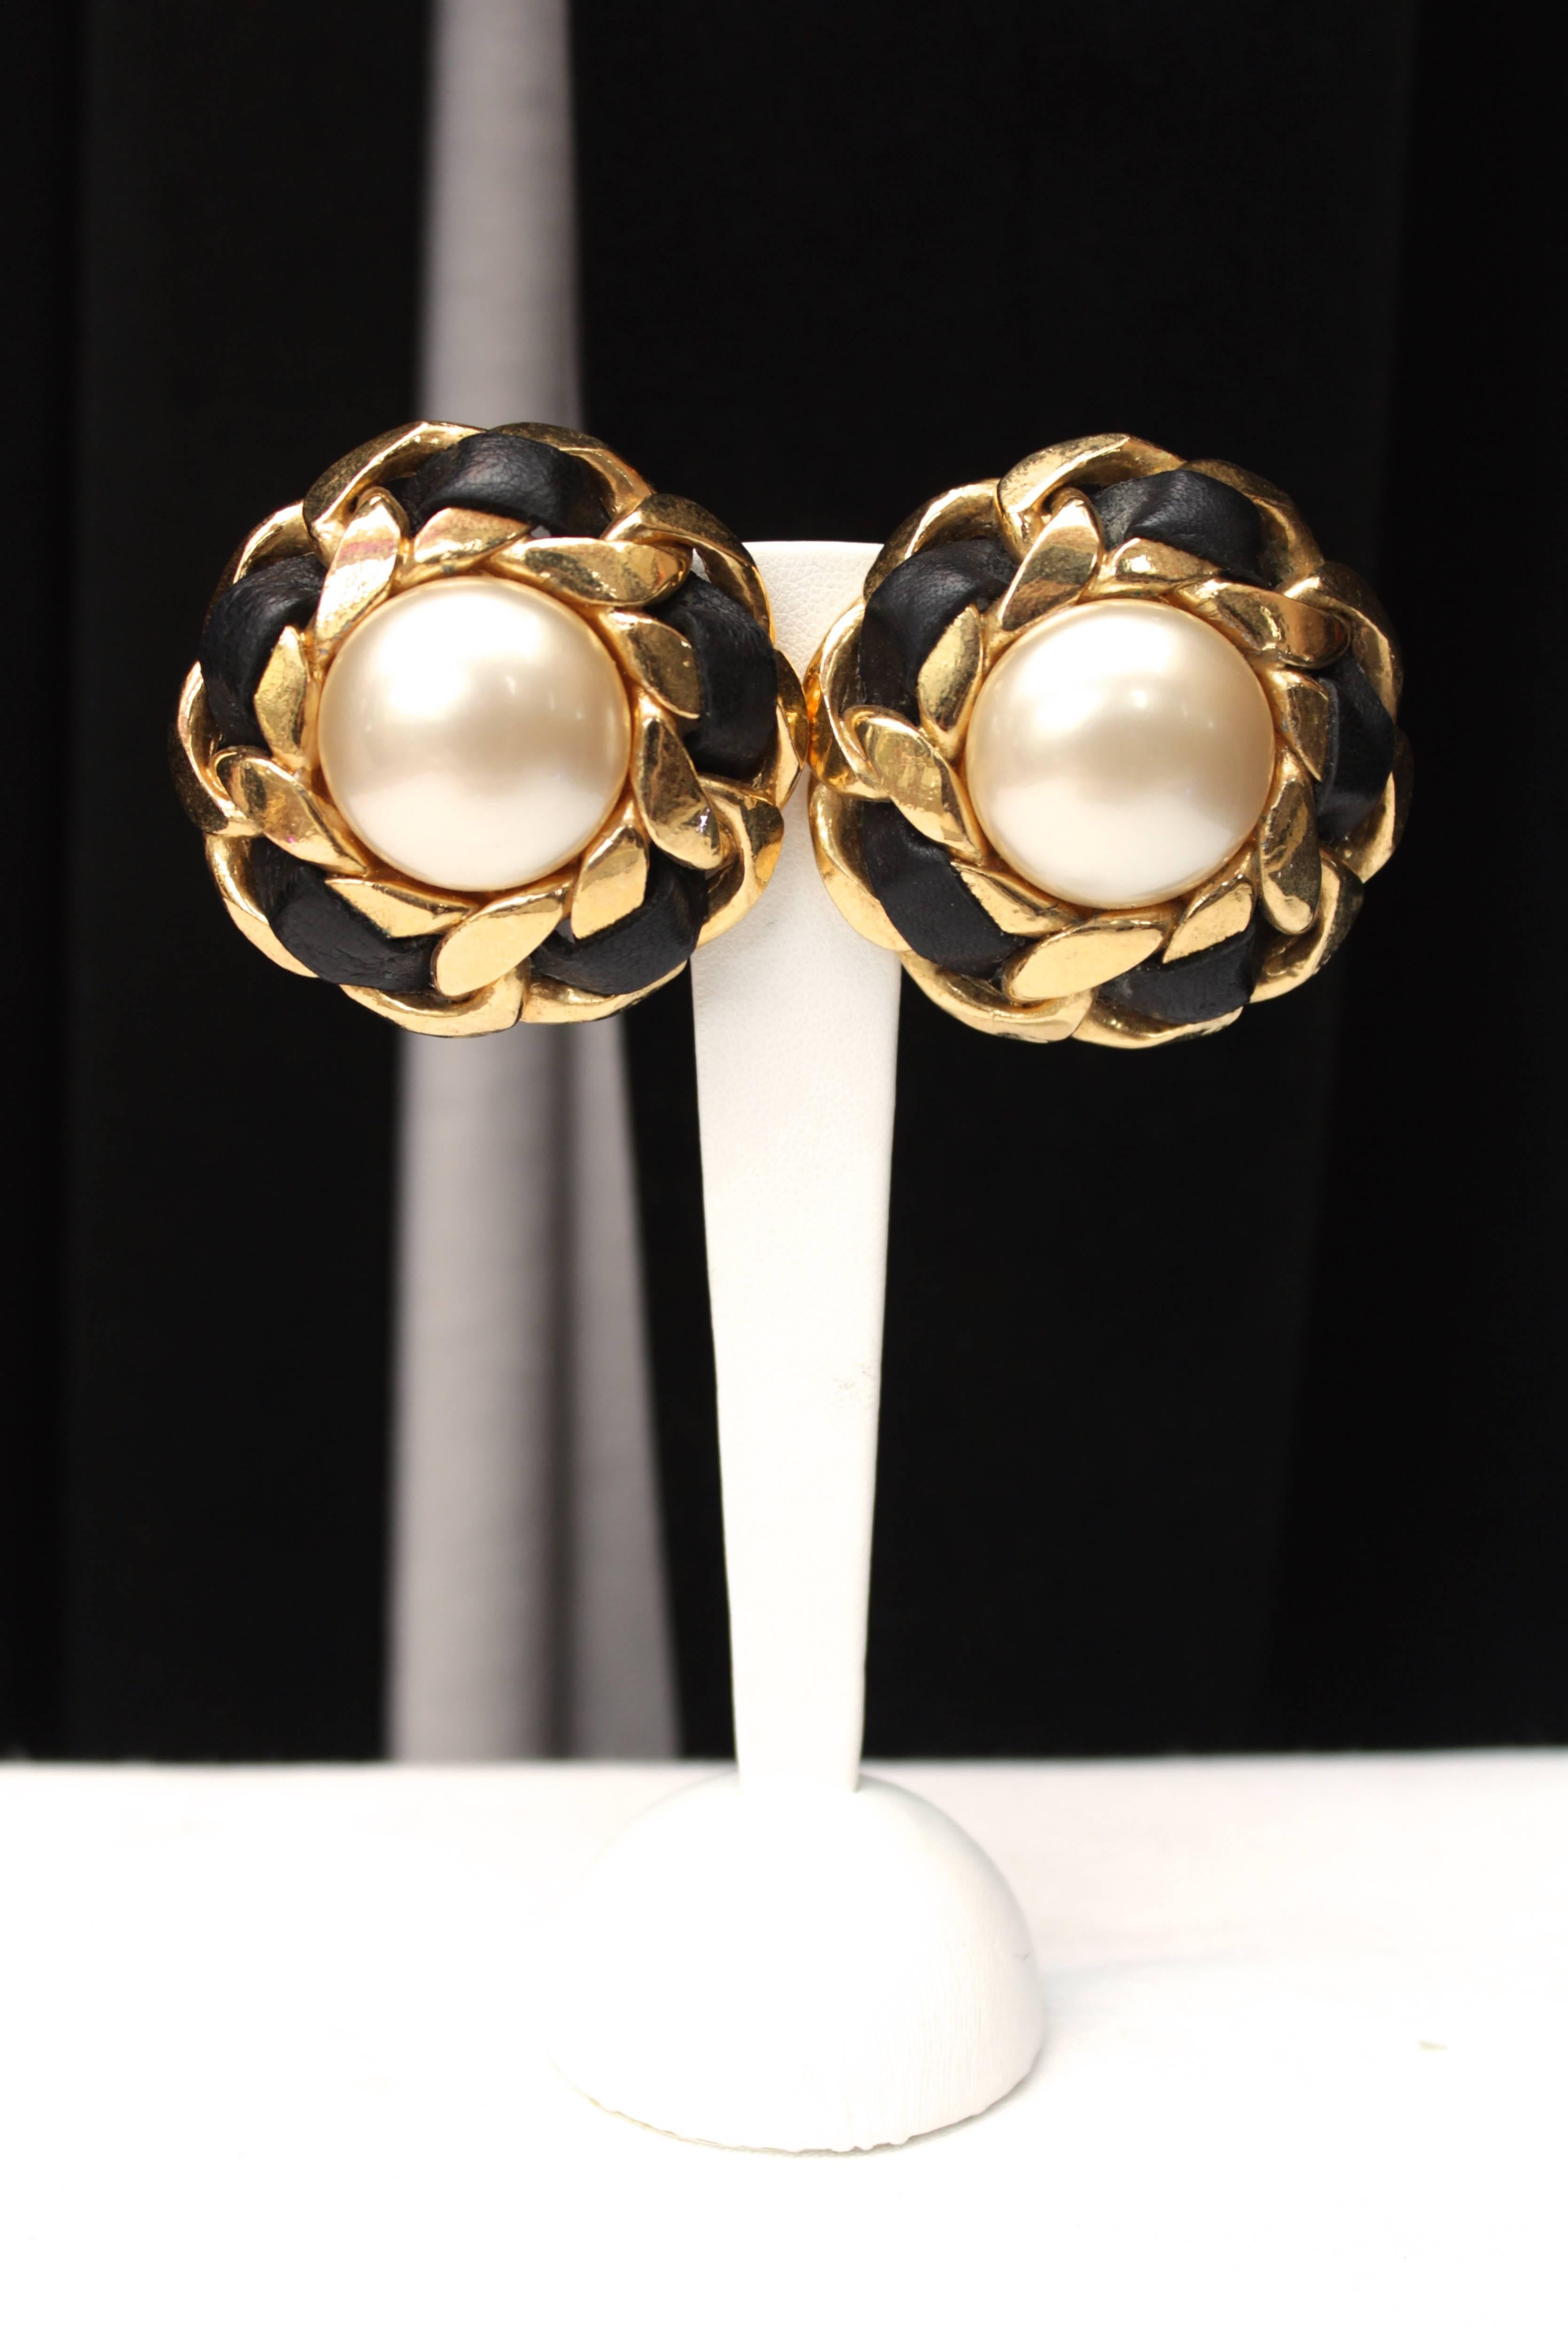 CHANEL (Made in France) Large clip on earrings composed of a curb gilt rigid chain interwoven with a black leather strap and centered with a faux pearl cabochon.

The earrings are signed on the back. 

They date from the late1980s / early